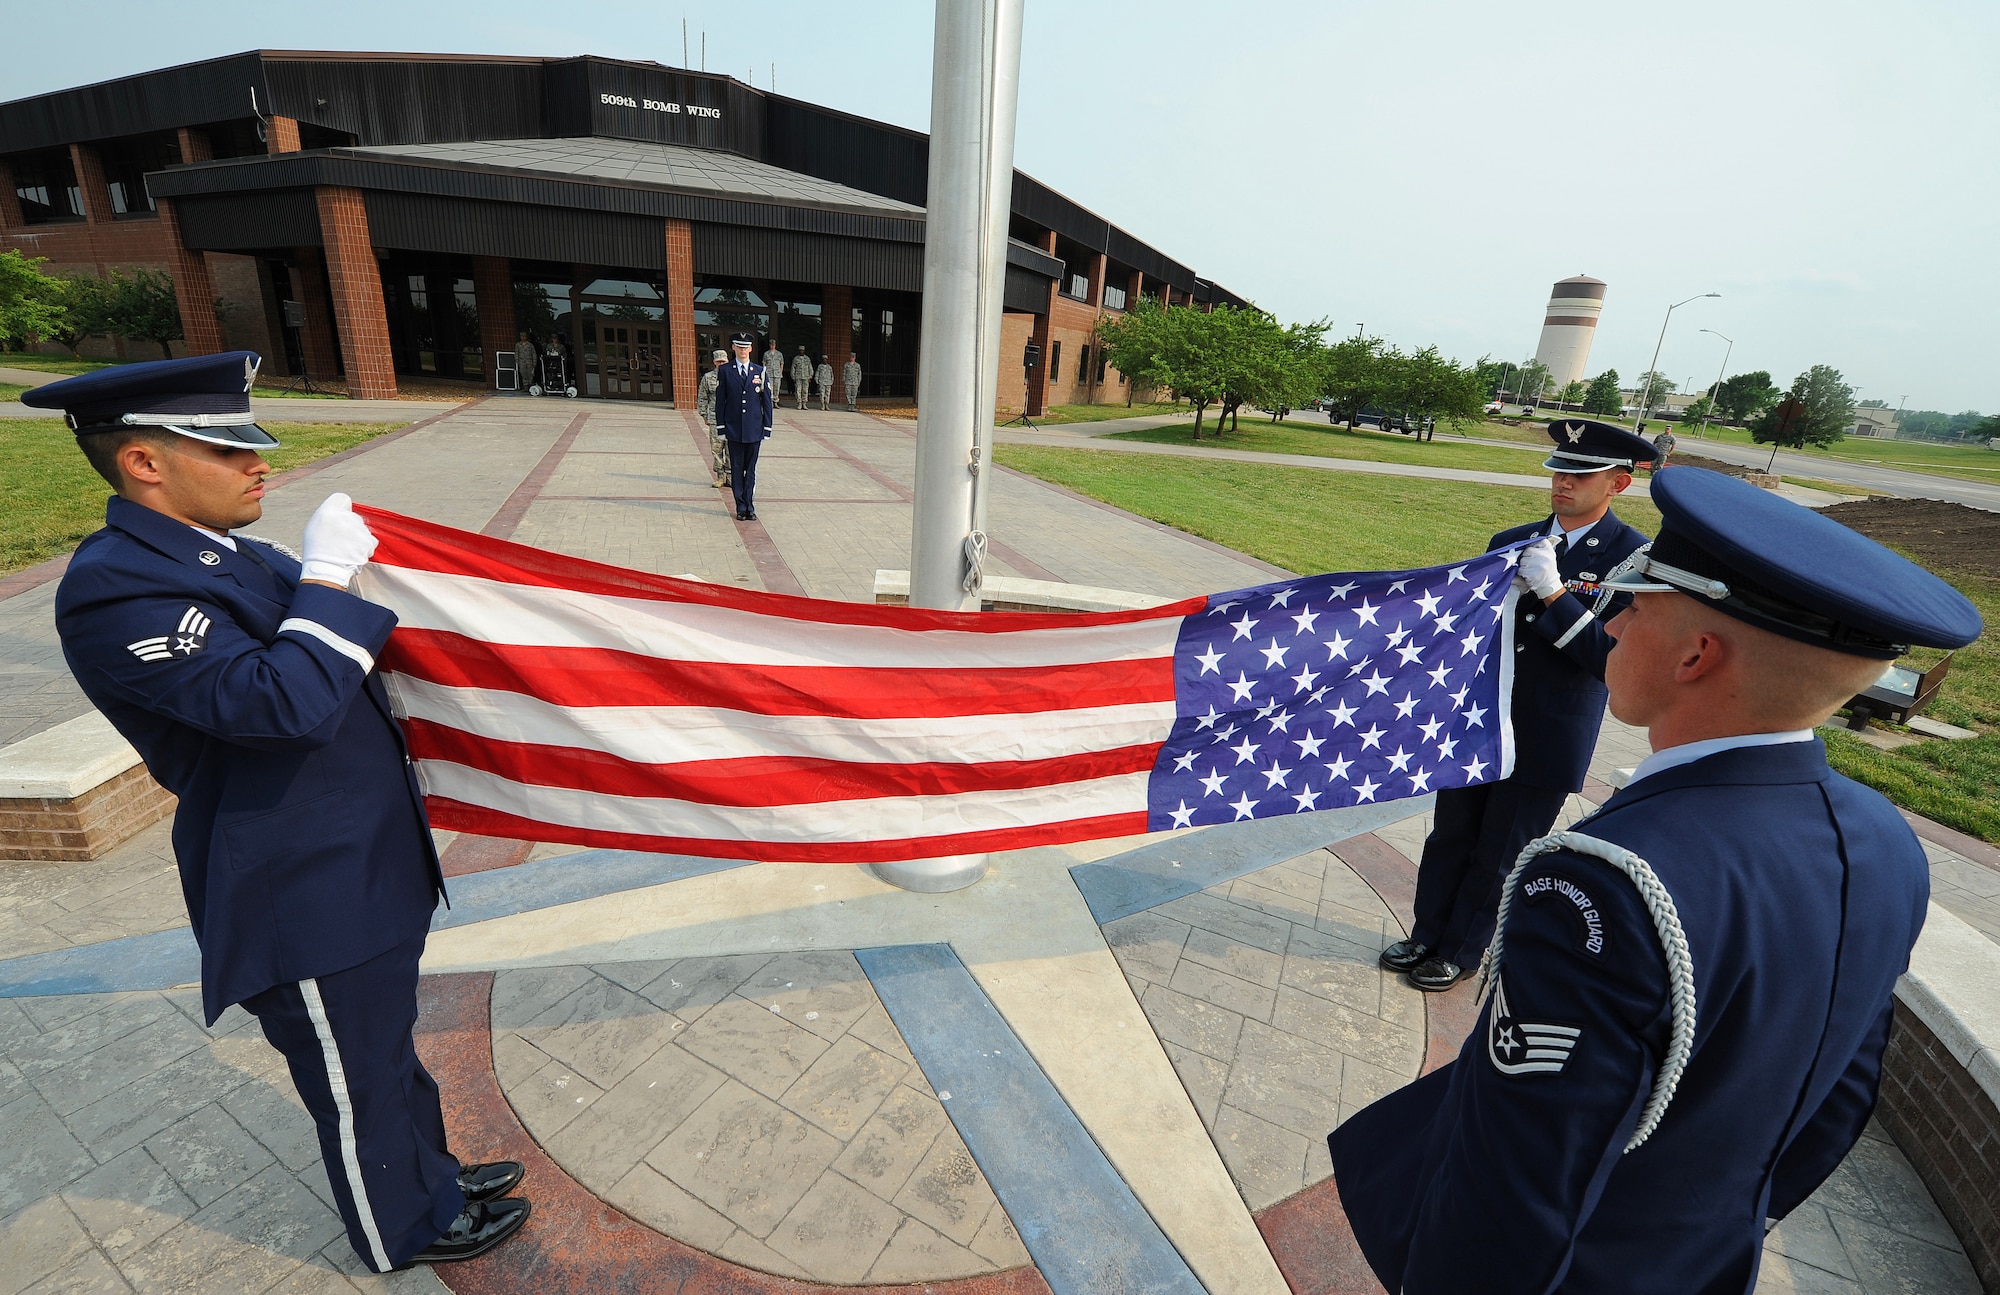 WHITEMAN AIR FORCE BASE, Mo. -- Ceremonial guardsmen from the 509th Bomb Wing Honor Guard perform a flag fold during a Wing Retreat Ceremony May 24, 2012. In honor of Memorial Day, Team Whiteman participated in a Wing Retreat Ceremony following the 2012 spring Wingman Day and Critical Days of Summer campaign. (U.S. Air Force photo/Senior Airman Nick Wilson) (Released)